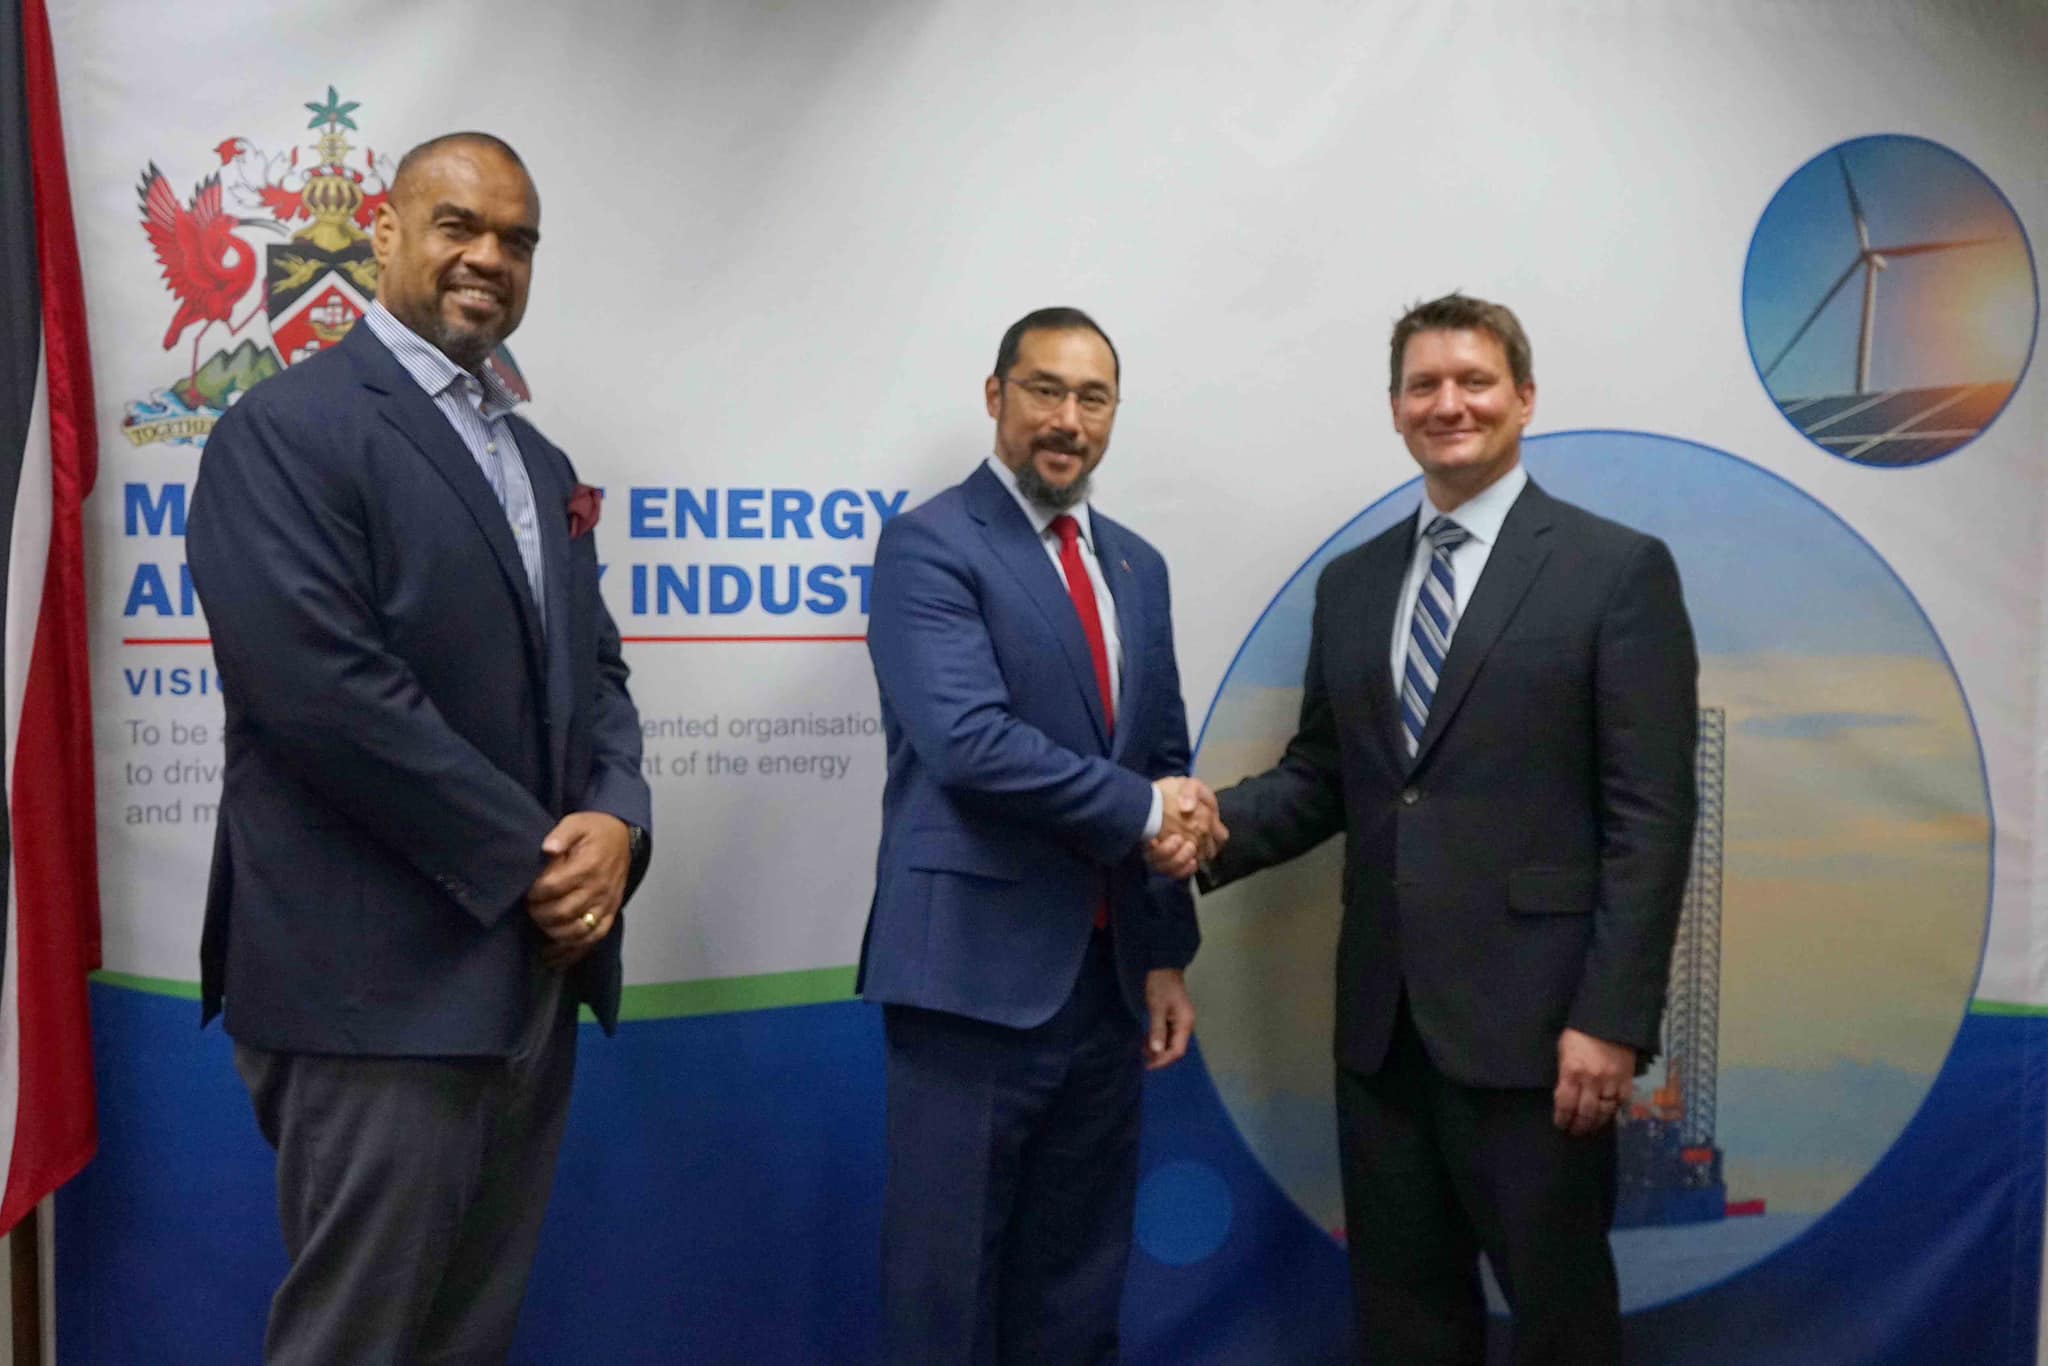 Energy Minister welcomes new Heritage CEO